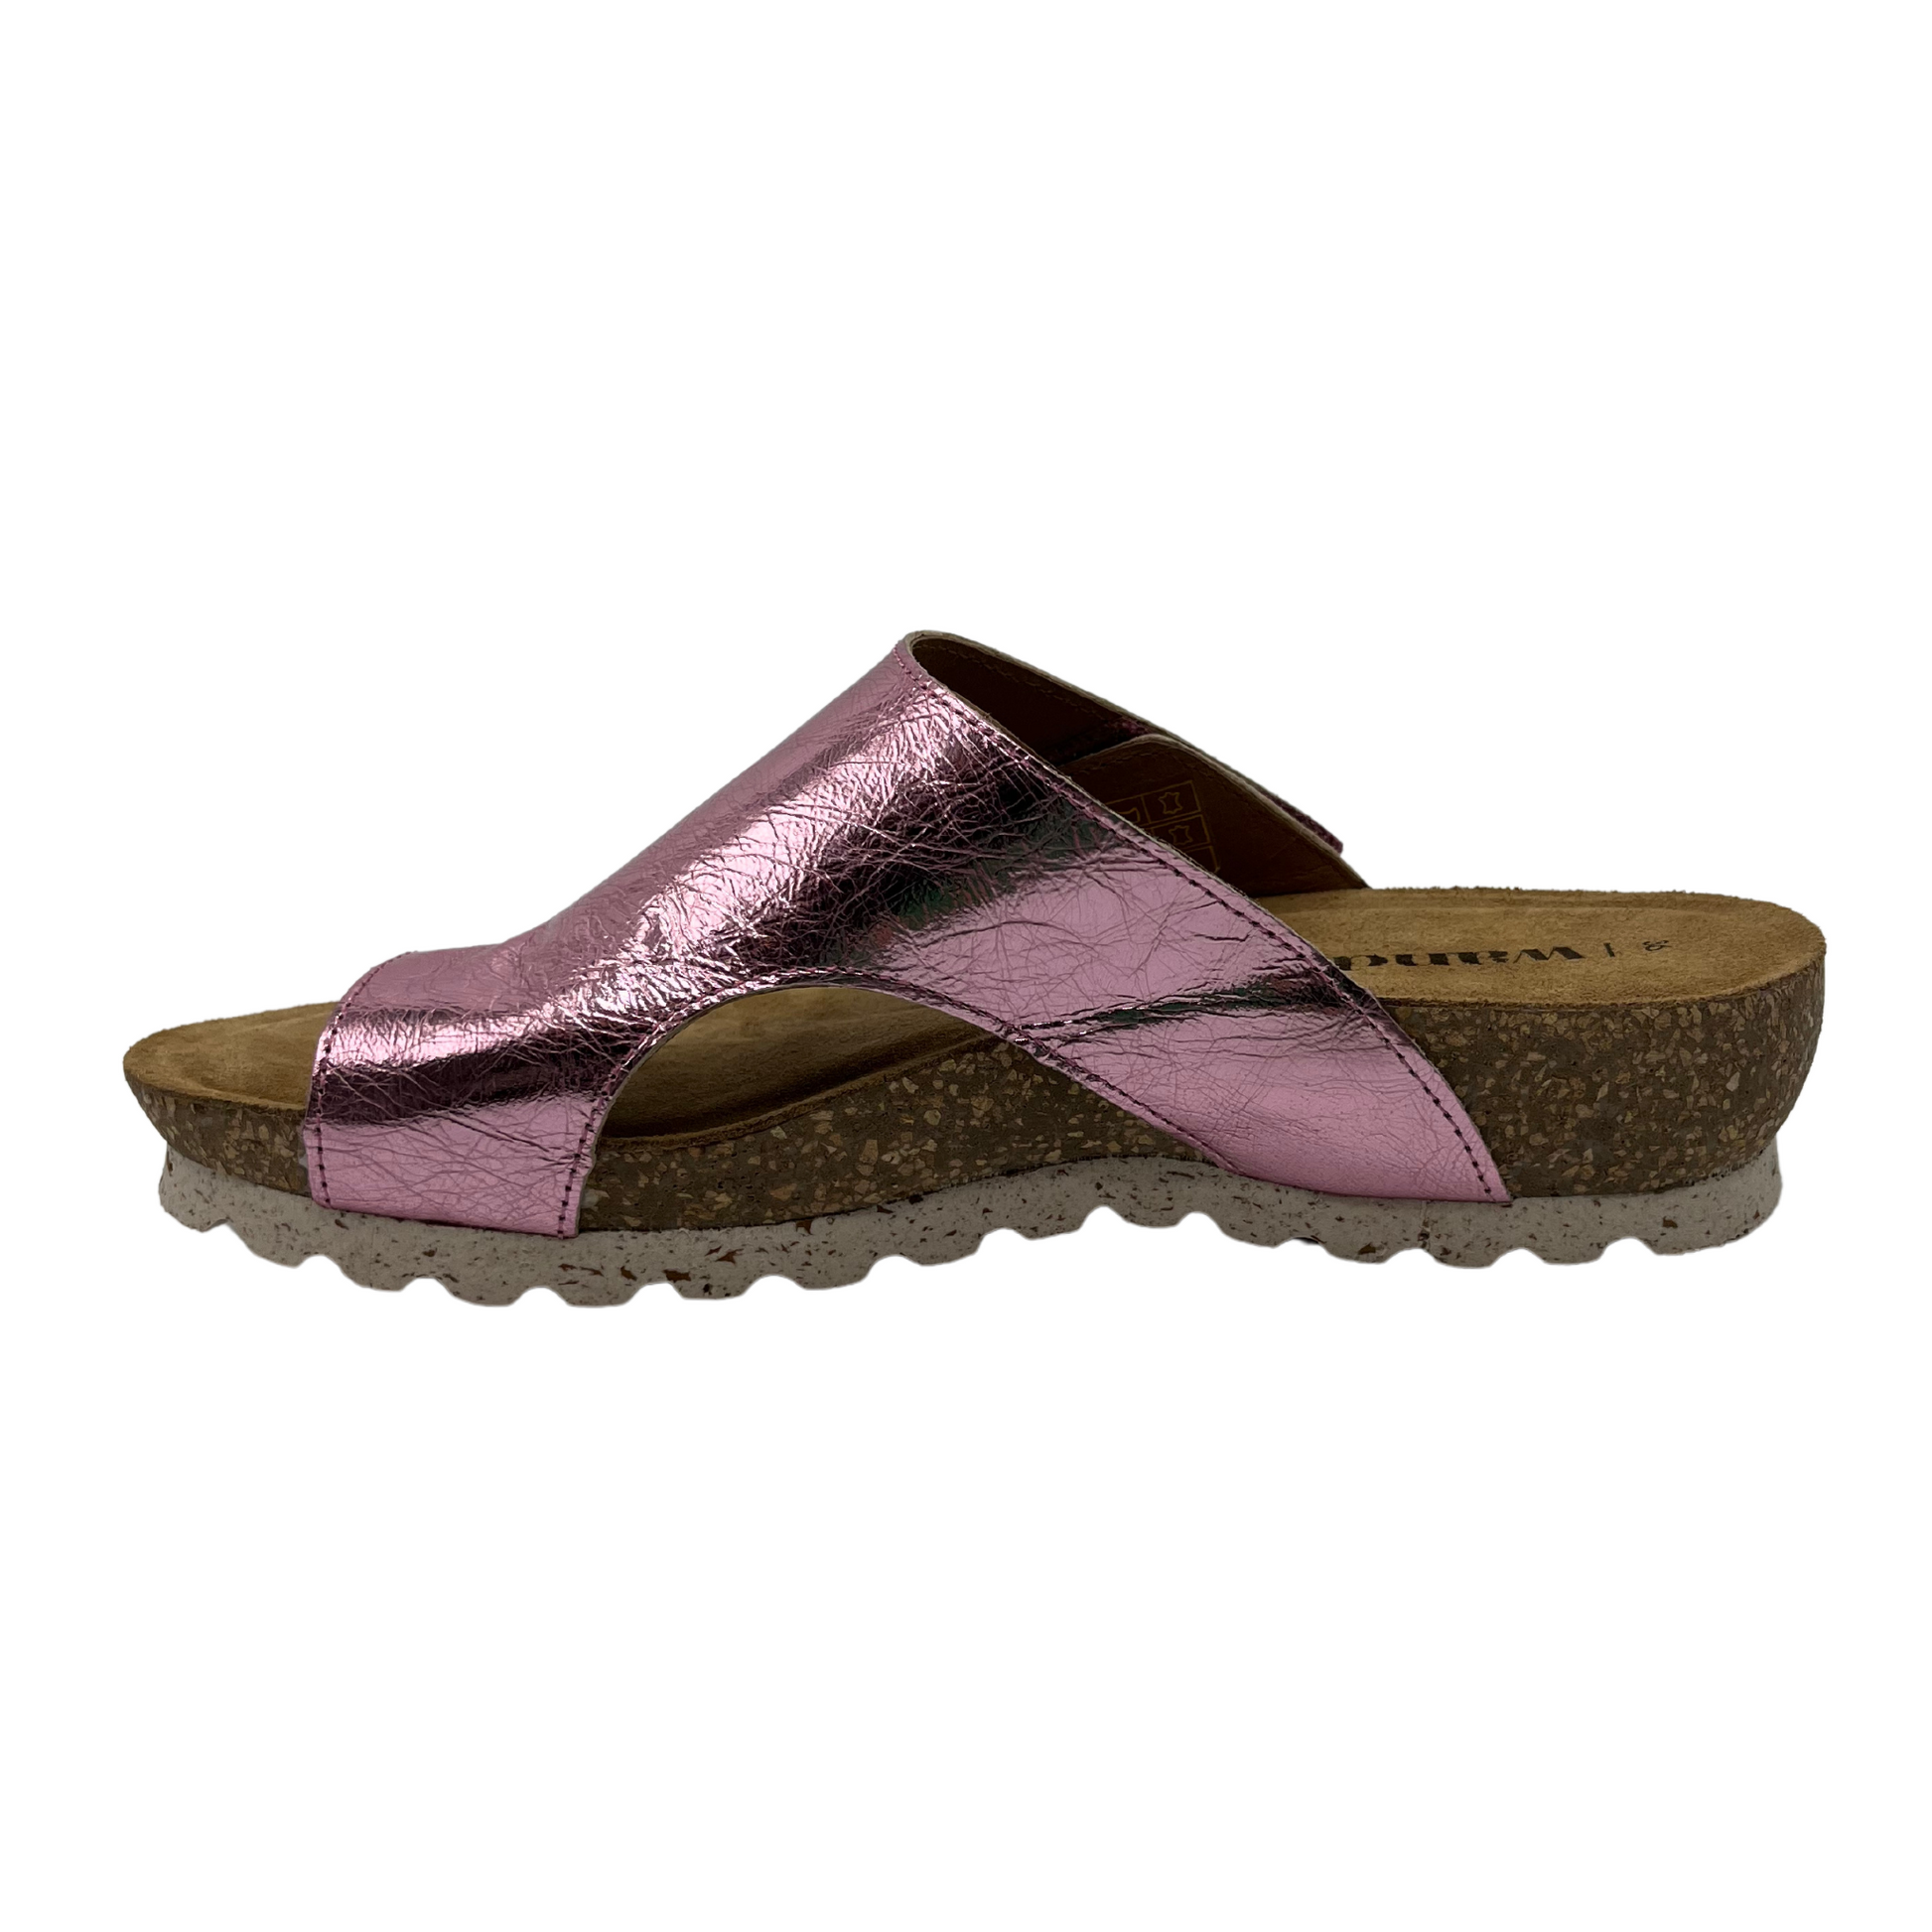 Left facing view of pink leather sandal with cork footbed